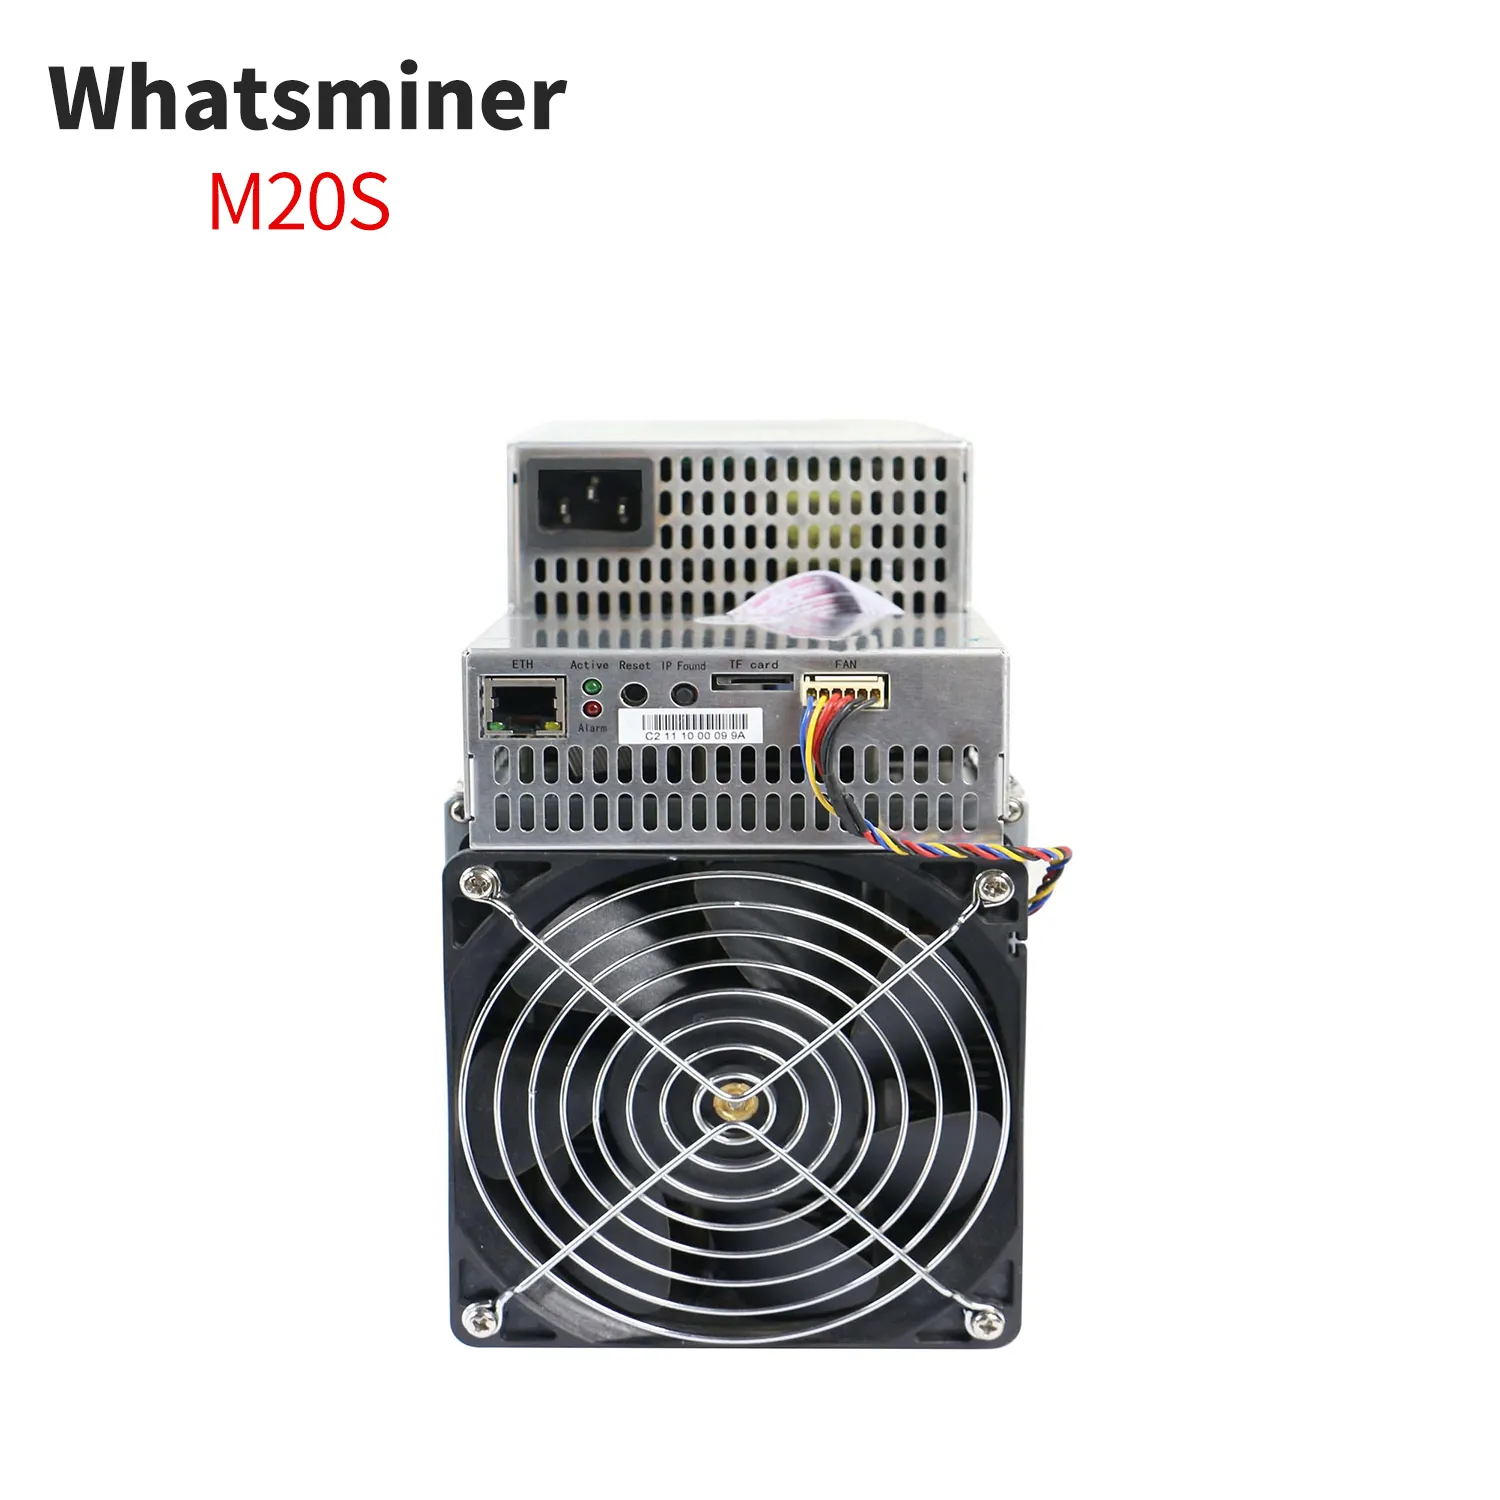 New Miner Microbt Whatsminer M20s 68th Miner Asic New Asic Mining Bitcoin Miner MicroBT Whatsminer M20s 68t In Stock